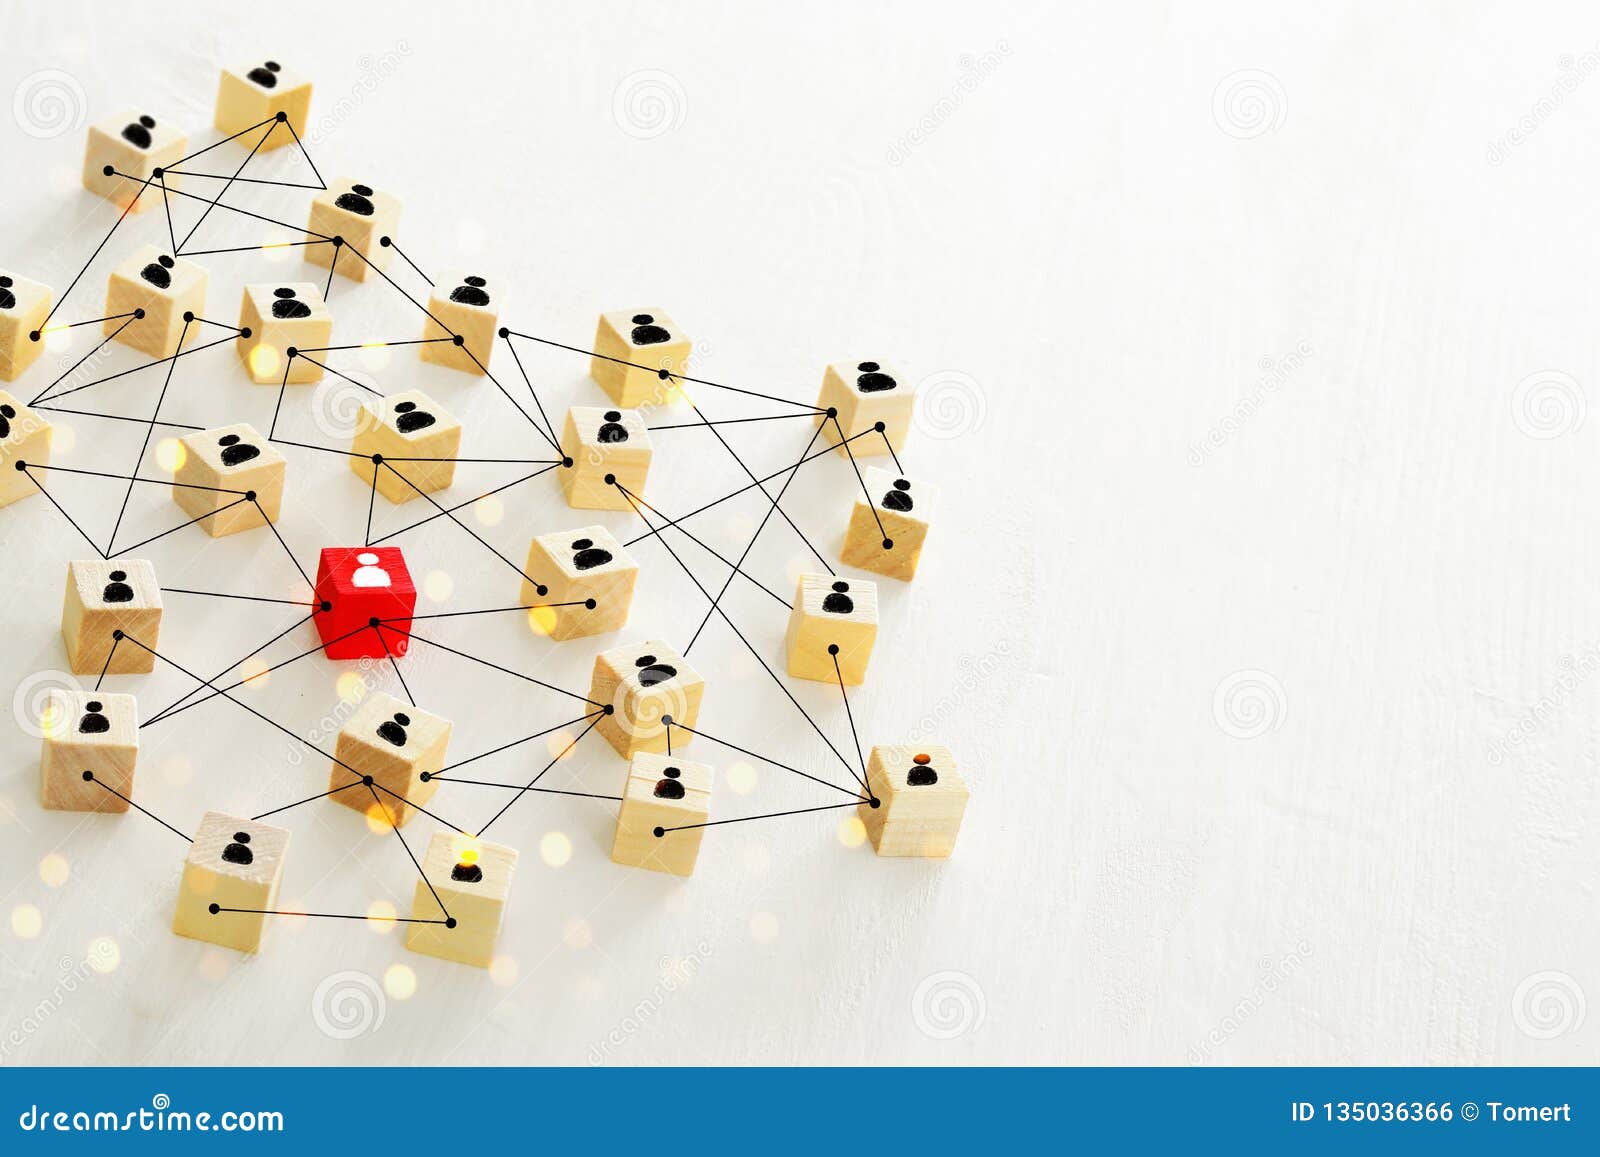 abstract photo of connectivity concept, linking entities, hierarchy and hr.